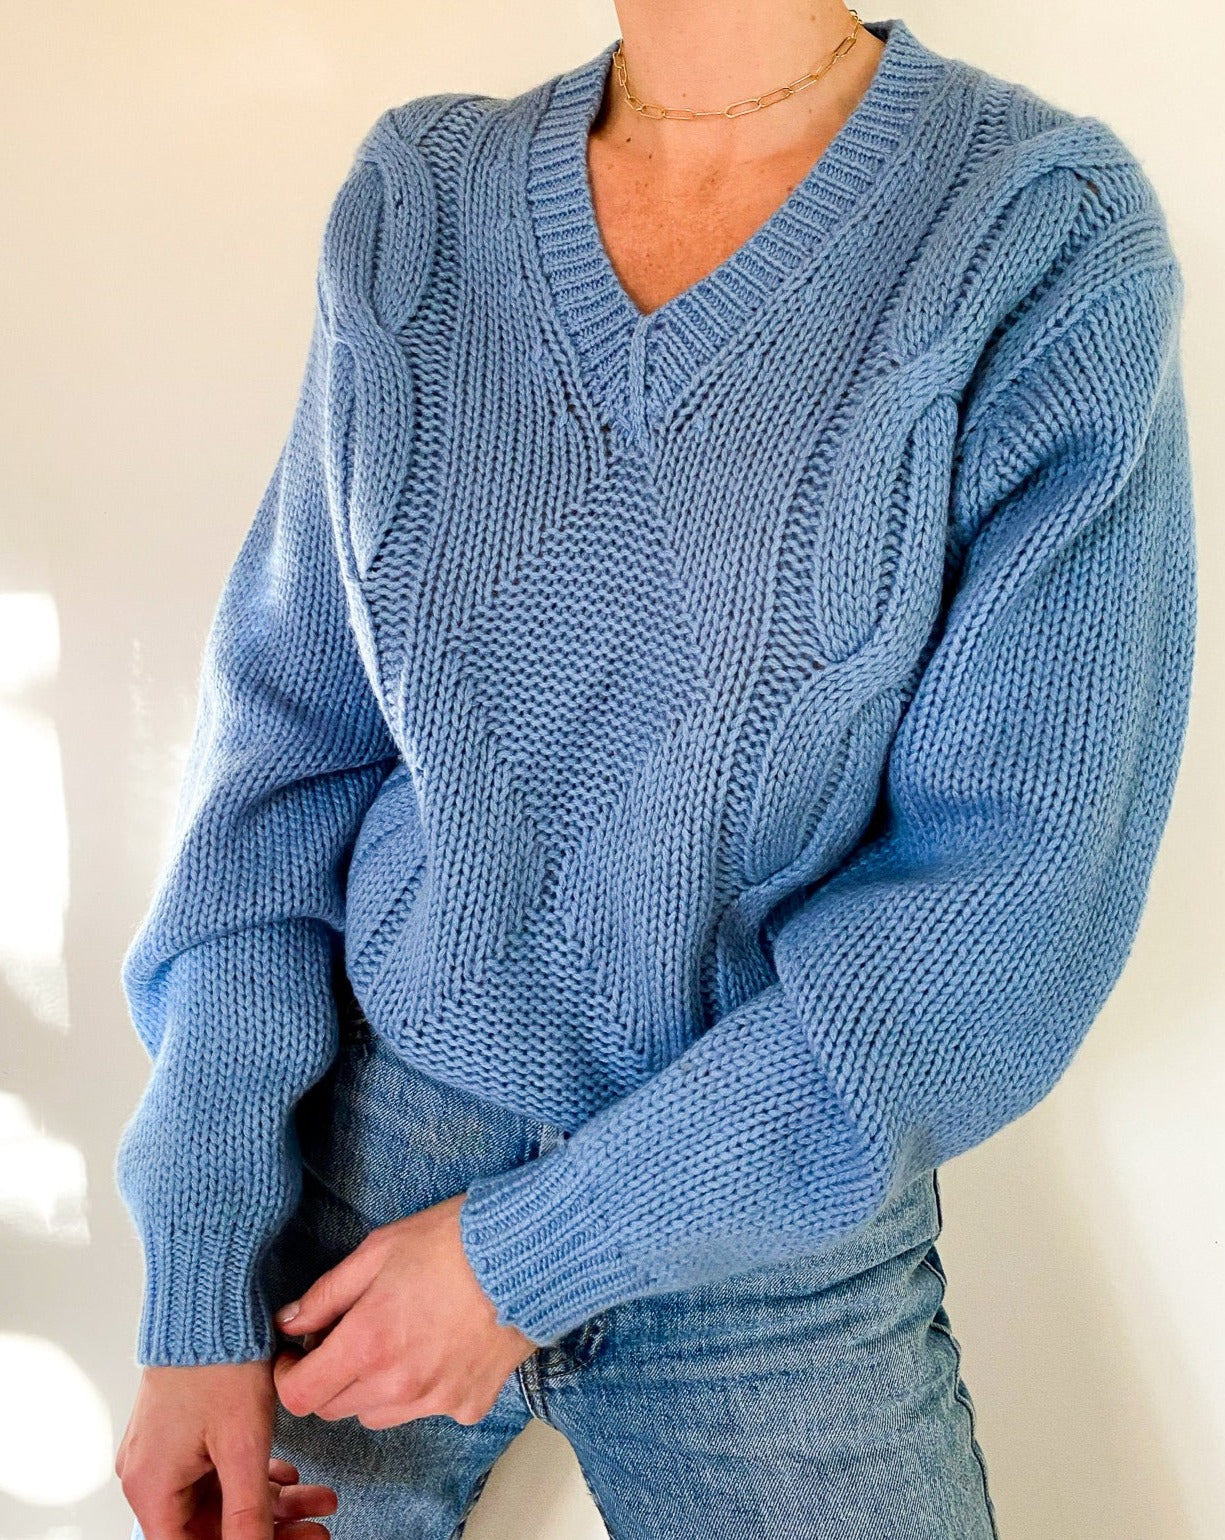 Vintage Baby Blue Cable Knit Sweater